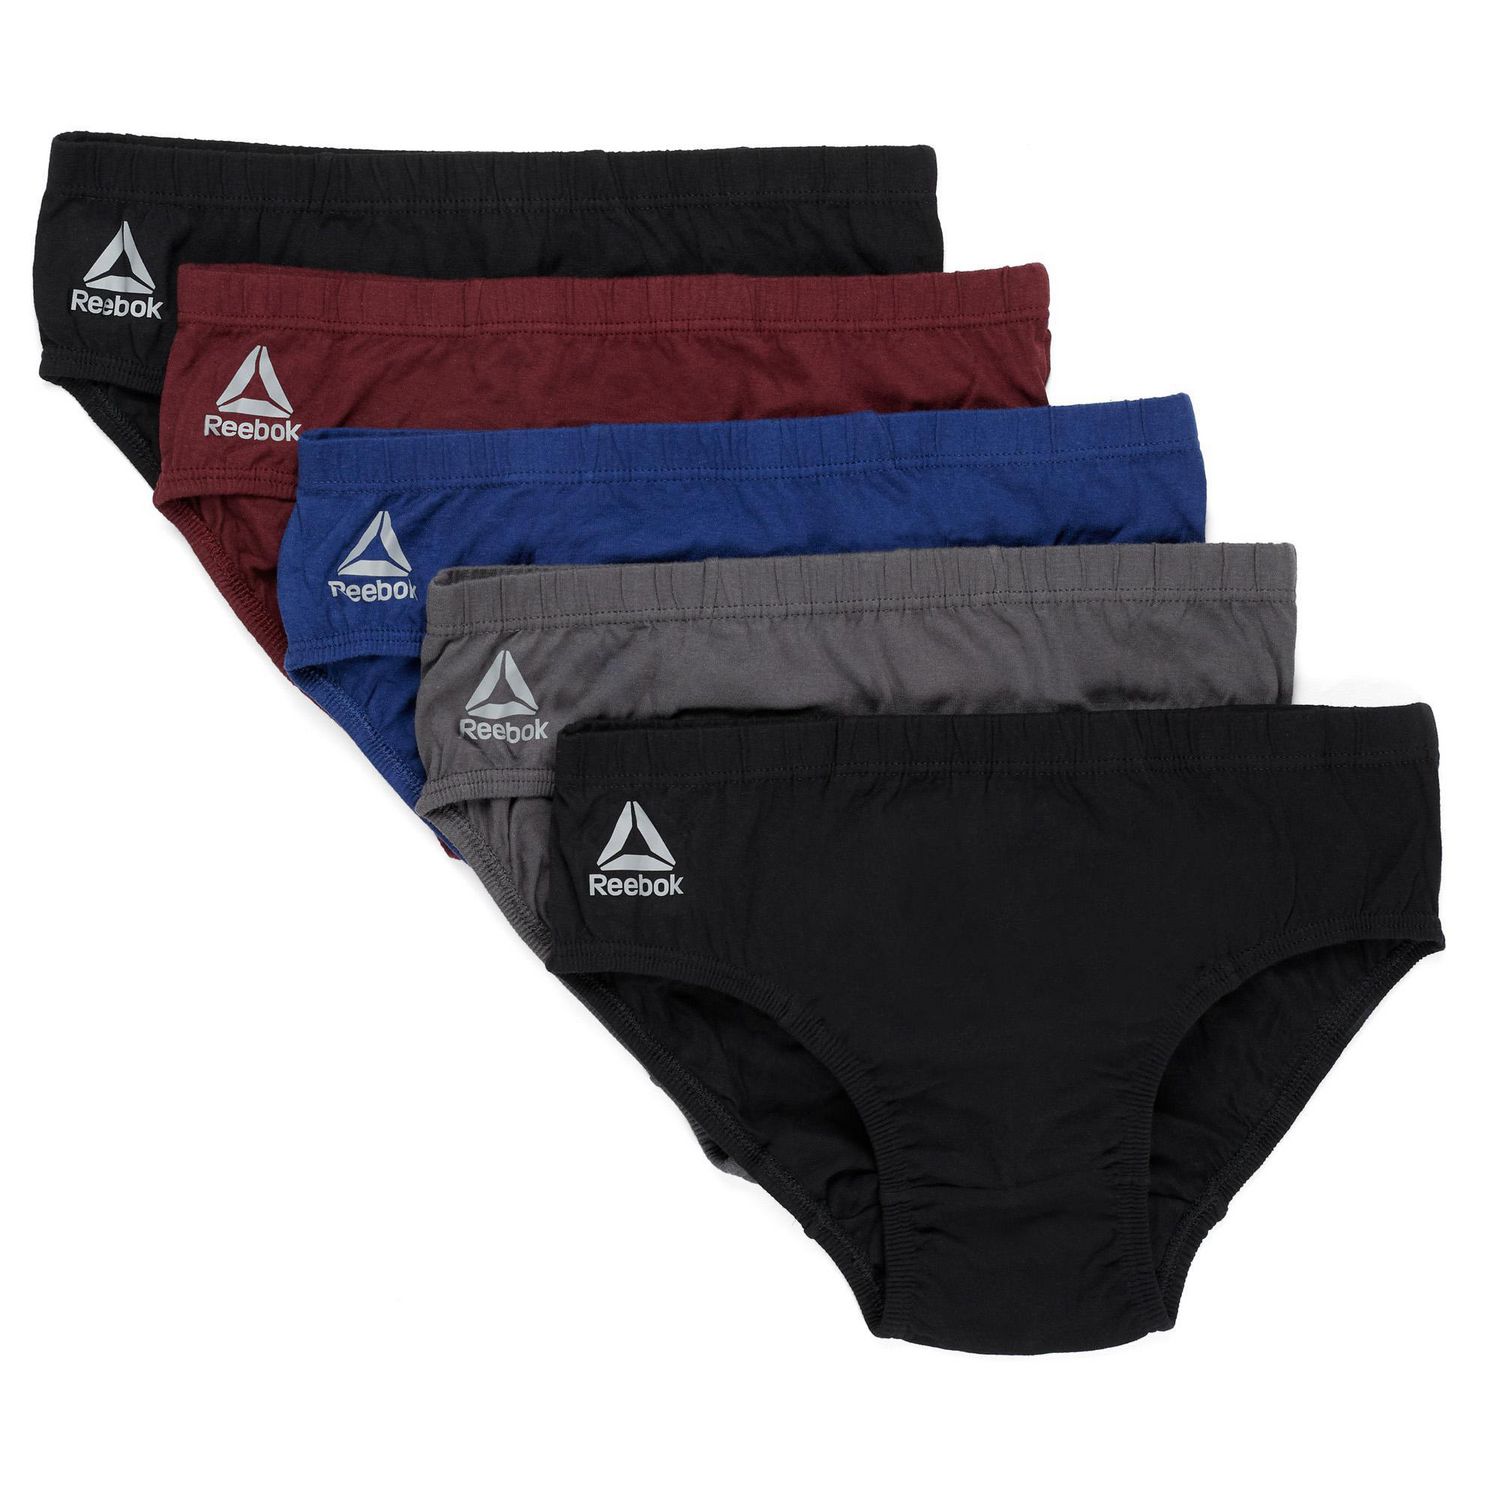 Reebok Men’s Underwear – Quick Dry Performance Low Rise Briefs (10 Pack),  Size Small, Black/Red/Charcoal/Navy